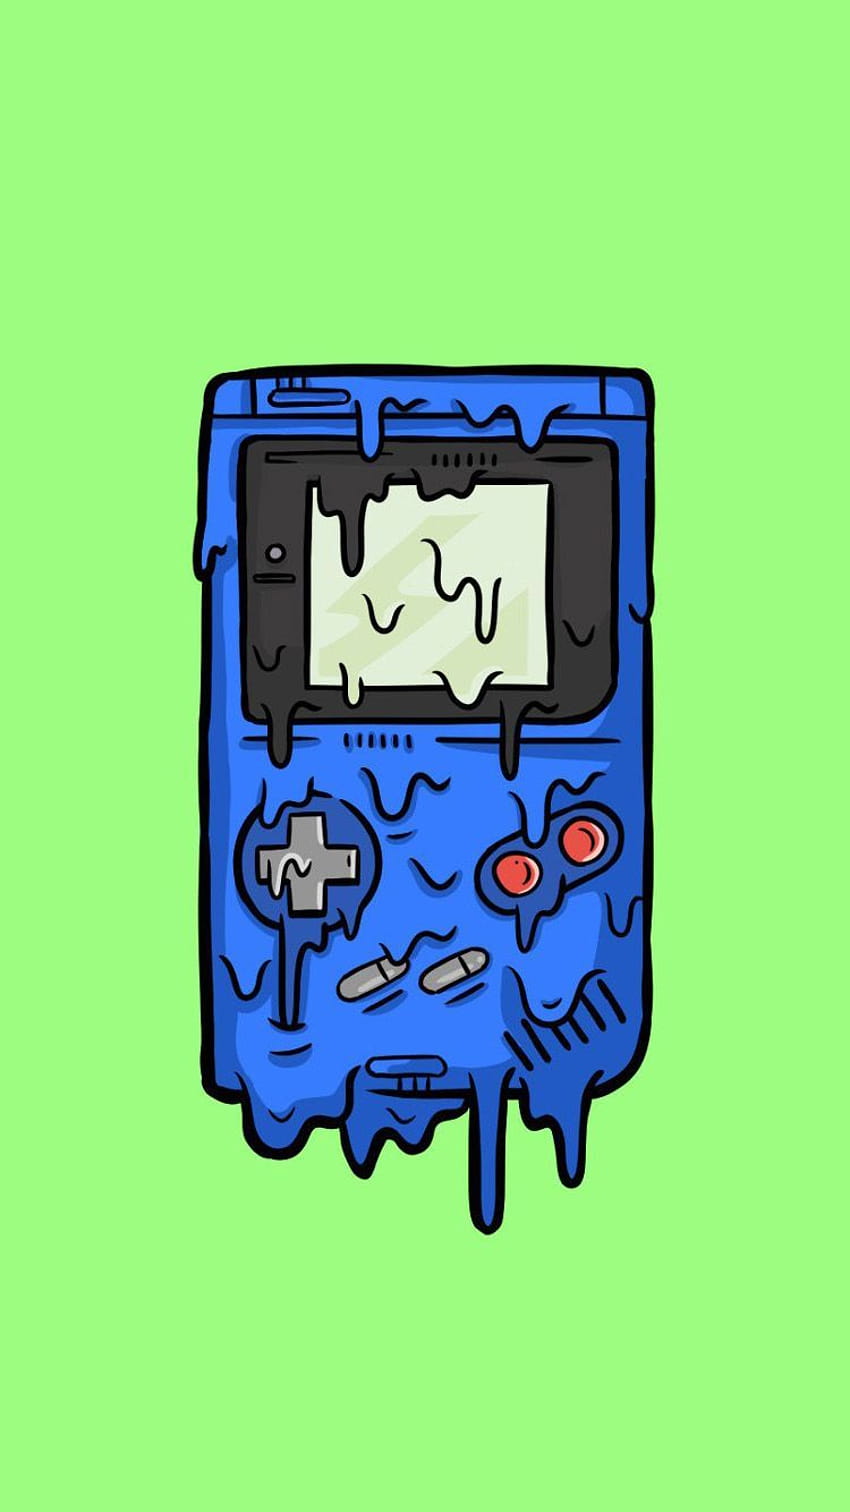 GAME BOY, gameboy color iphone HD phone wallpaper